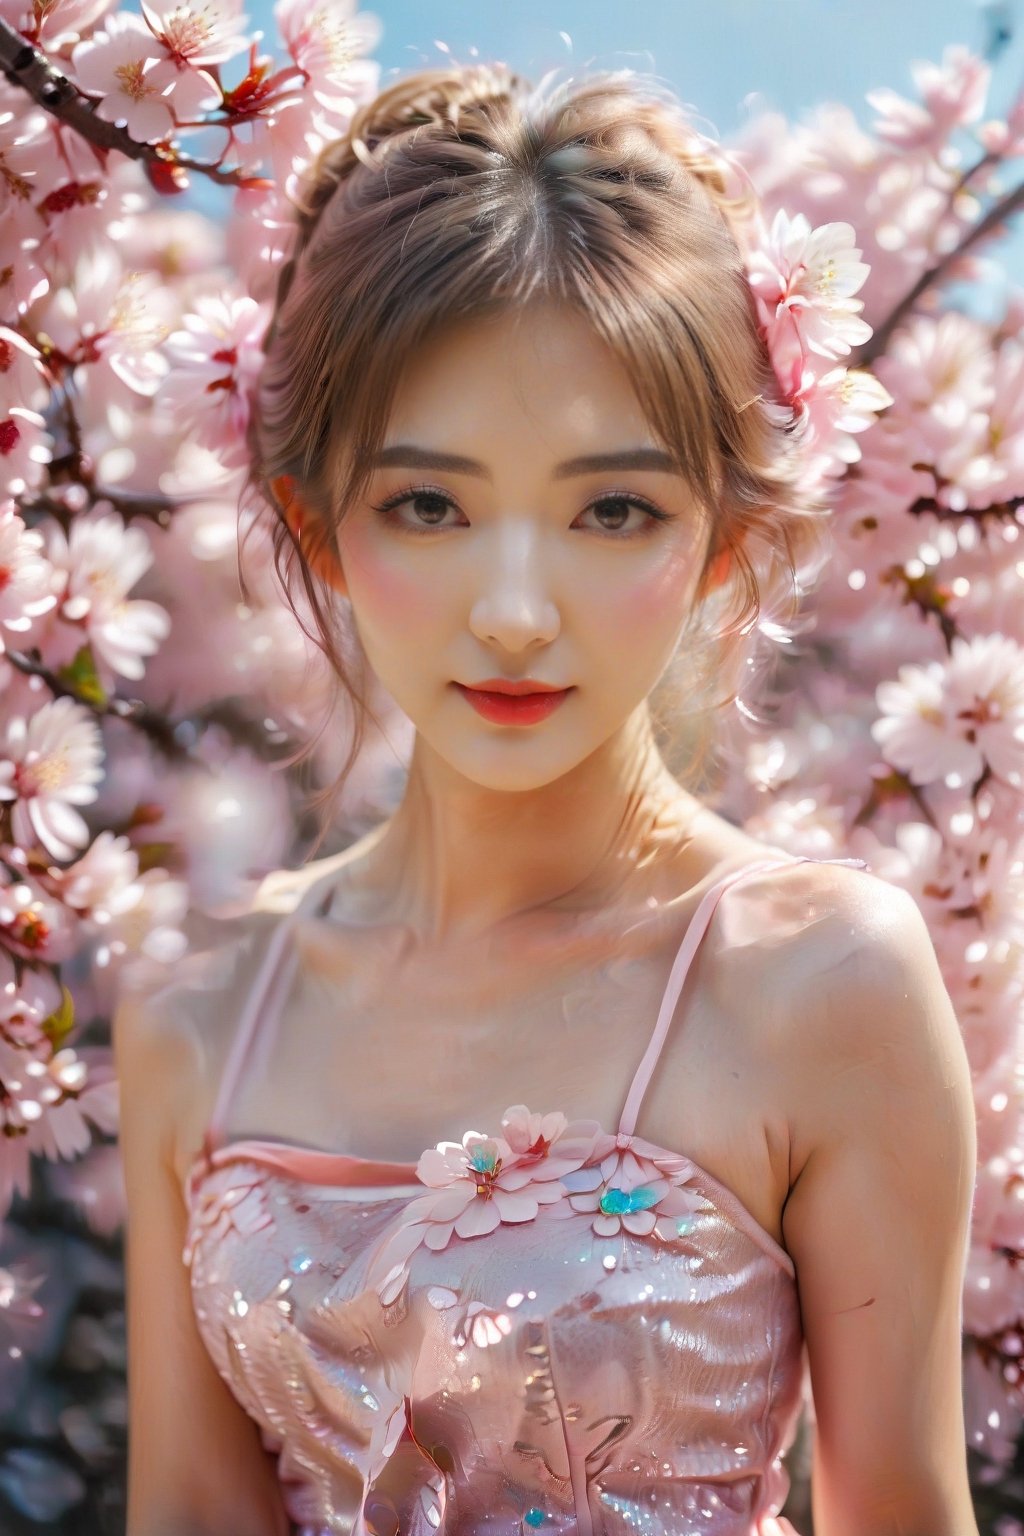 Masterpiece, beautiful details, perfect focus, uniform 8K wallpaper, high resolution, exquisite texture in every detail,((from below:1.5)),
1 girl, brown hair, half-up pony hairstyle, brown eyes, clear shining deep eyes, smile, happy, open mouth, medium chest, cleavage, panties,
break
Transform yourself into a whimsical cherry blossom fairy with this enchanting costume. Start with a flowing pastel dress in shades of pink or white, reminiscent of the delicate petals of a cherry blossom. Look for dresses with floral lace details or sheer overlays for a touch of grace. , ((plus sheer)),
break
Create a fairy aesthetic with rainbow colored feathers and decorate them with fake cherry blossoms for a magical effect.
Accessorize with a flower crown made of cherry blossoms or a delicate floral hair clip, complete the look with ballet flats or sandals decorated with floral decorations, and a fairy-like look with rosy cheeks and pink lips. Choose soft, natural makeup that enhances your look.
break,Sakura